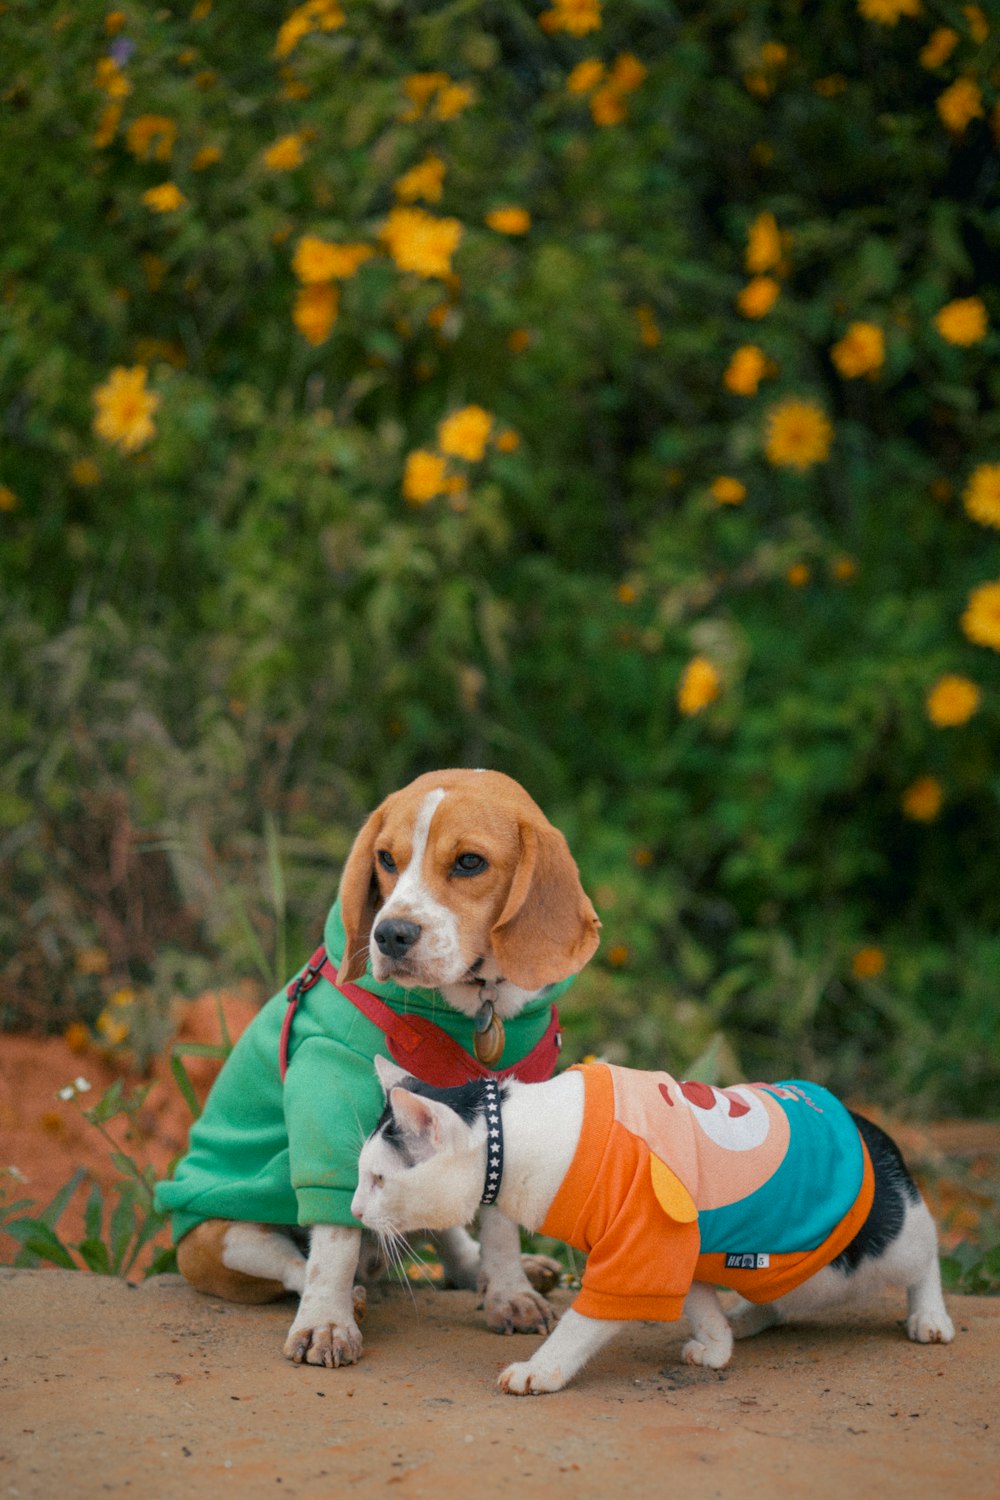 a beagle puppy wearing a colorful shirt